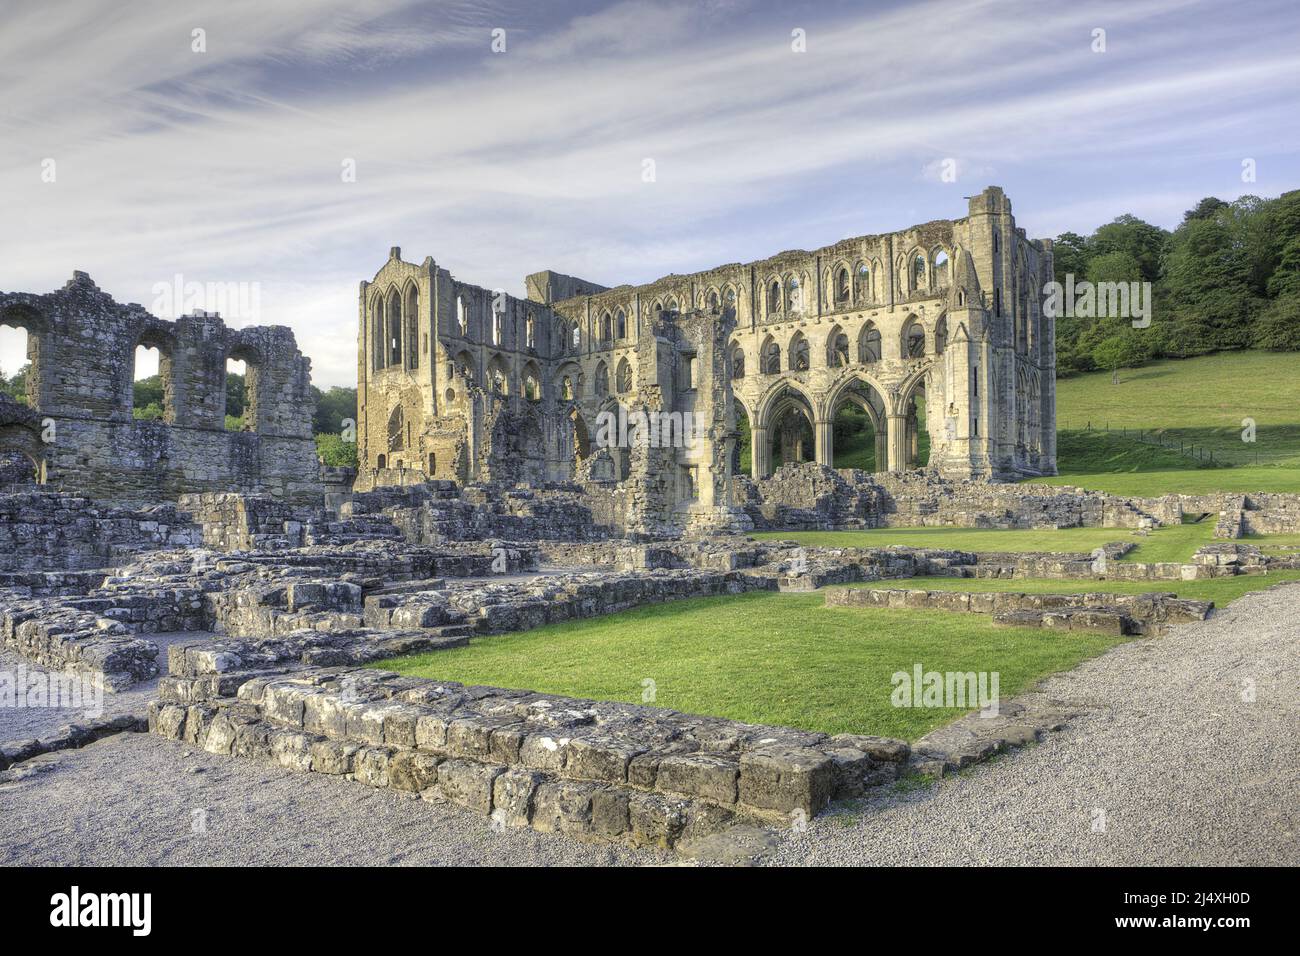 Presbytery, South Transept & wall of the Infirmary (at left) of ruined Rievaulx Cistercian Abbey founded 1132 - suppressed 1538. Stock Photo